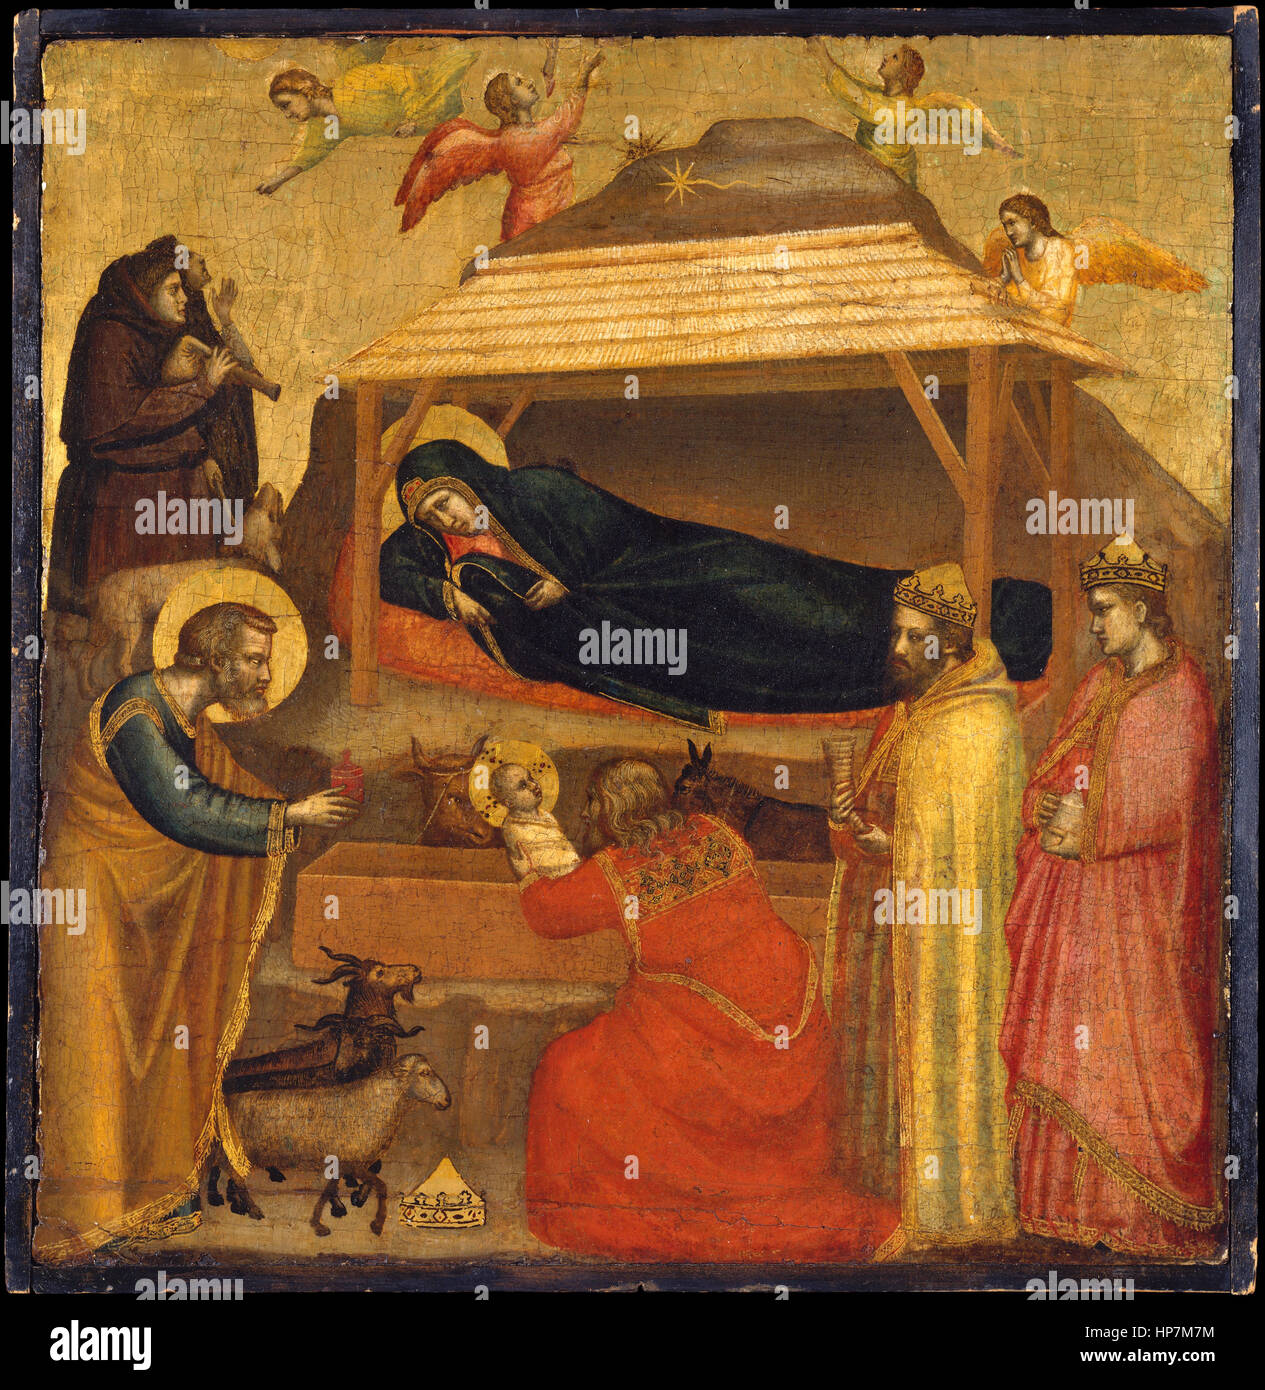 The Adoration of Magi, painting by Giotto di Bondone Stock Photo